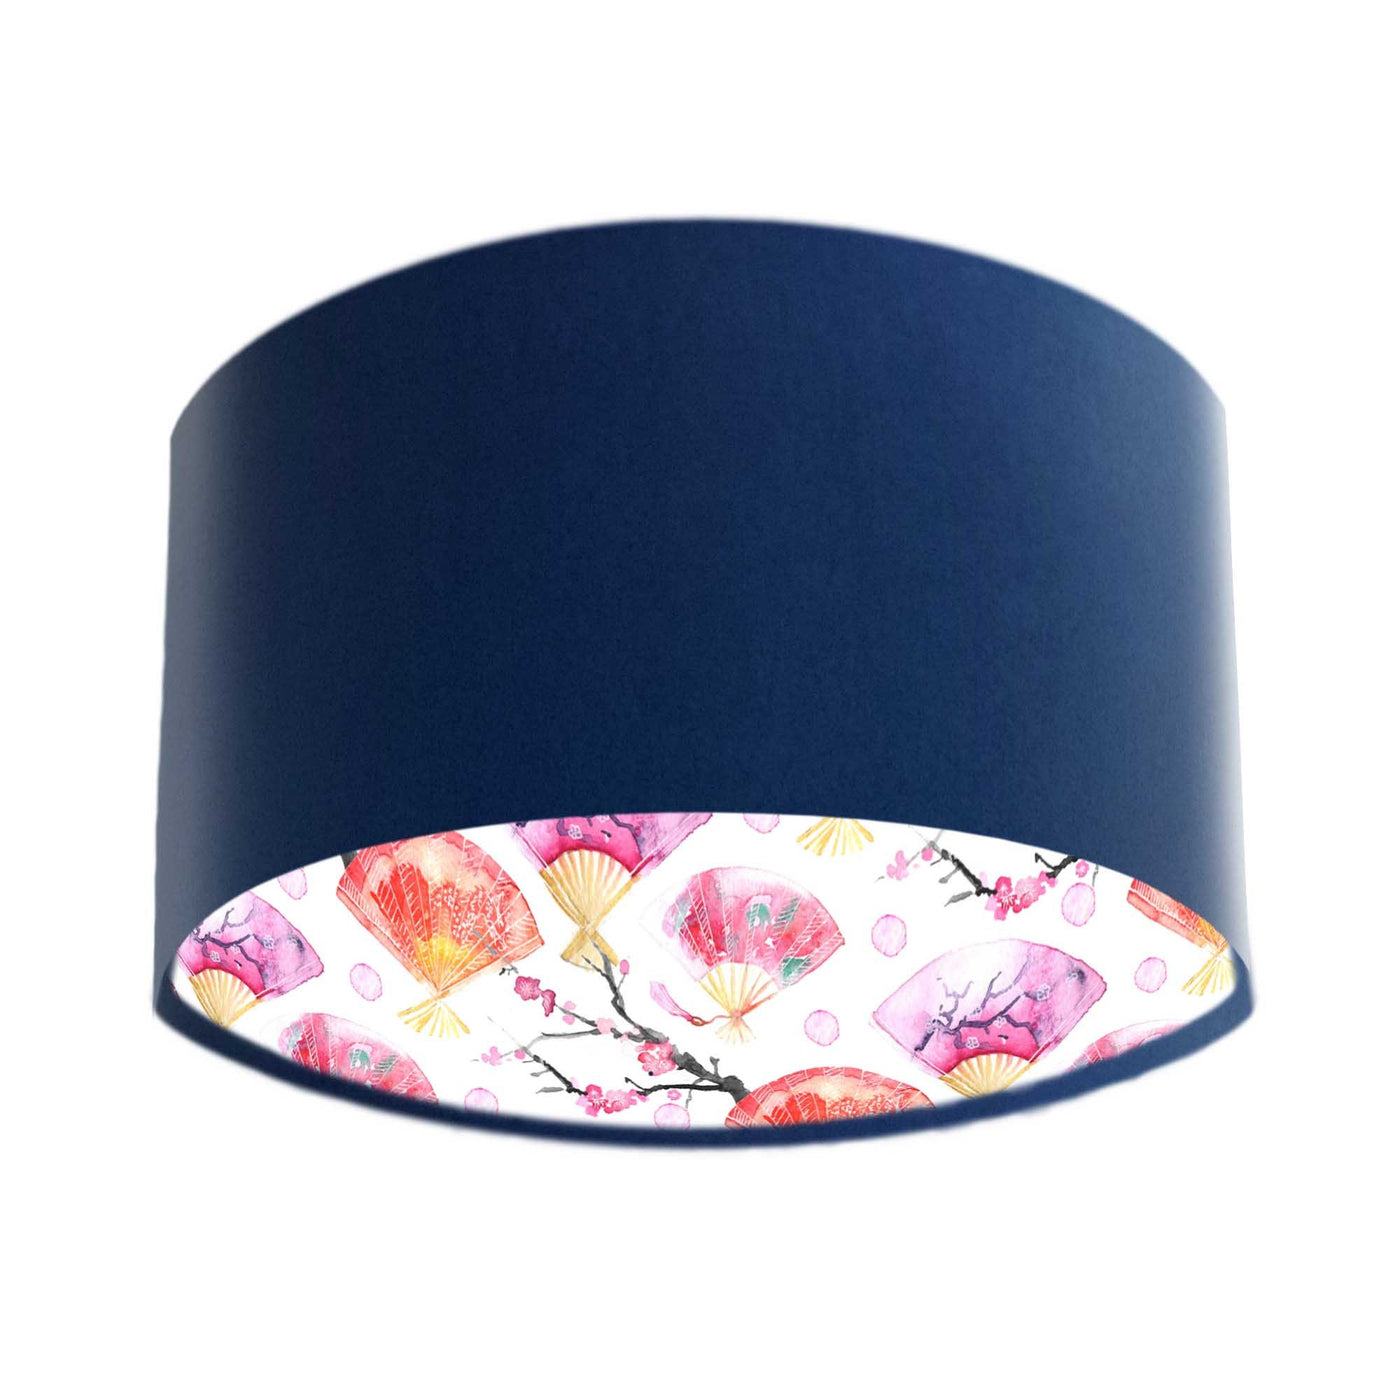 Japanese Fan and Cherry Blossoms Lampshade in Navy Blue Velvet